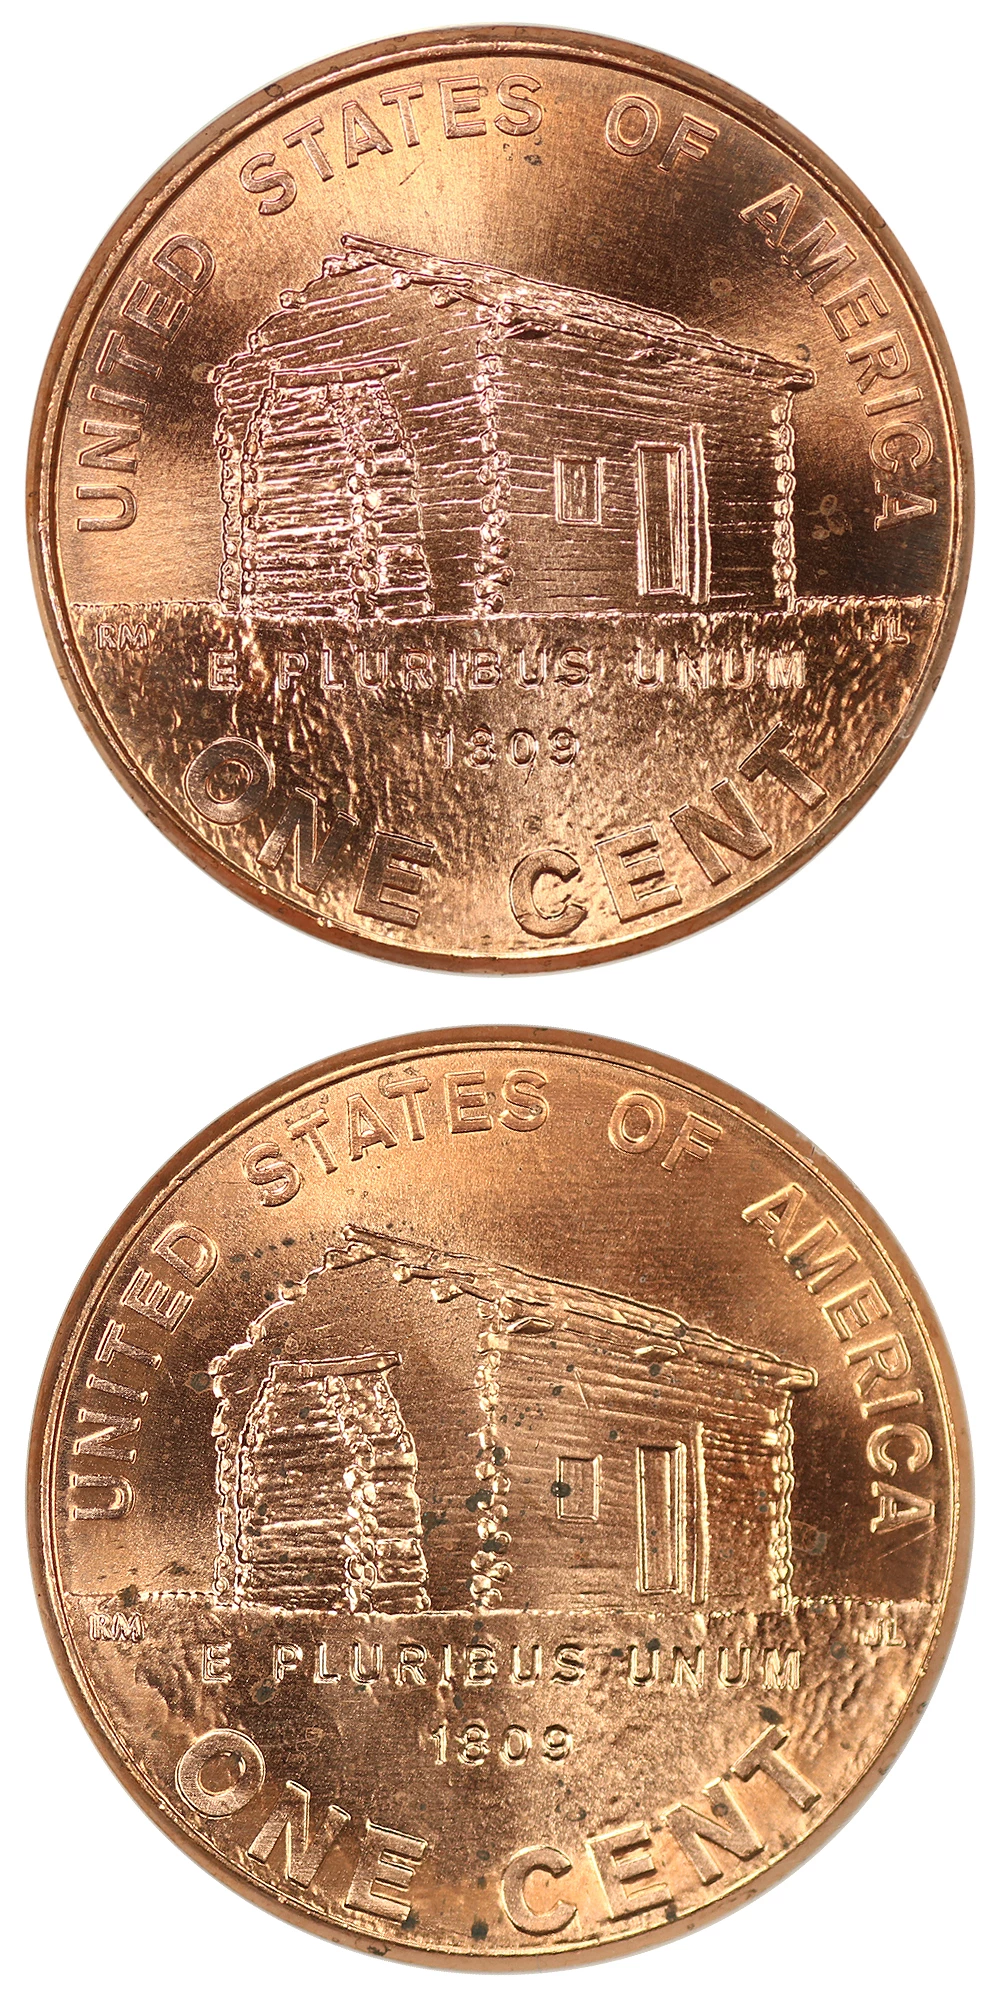 2009 Lincoln Penny Value and Designs ($850 Penny?)